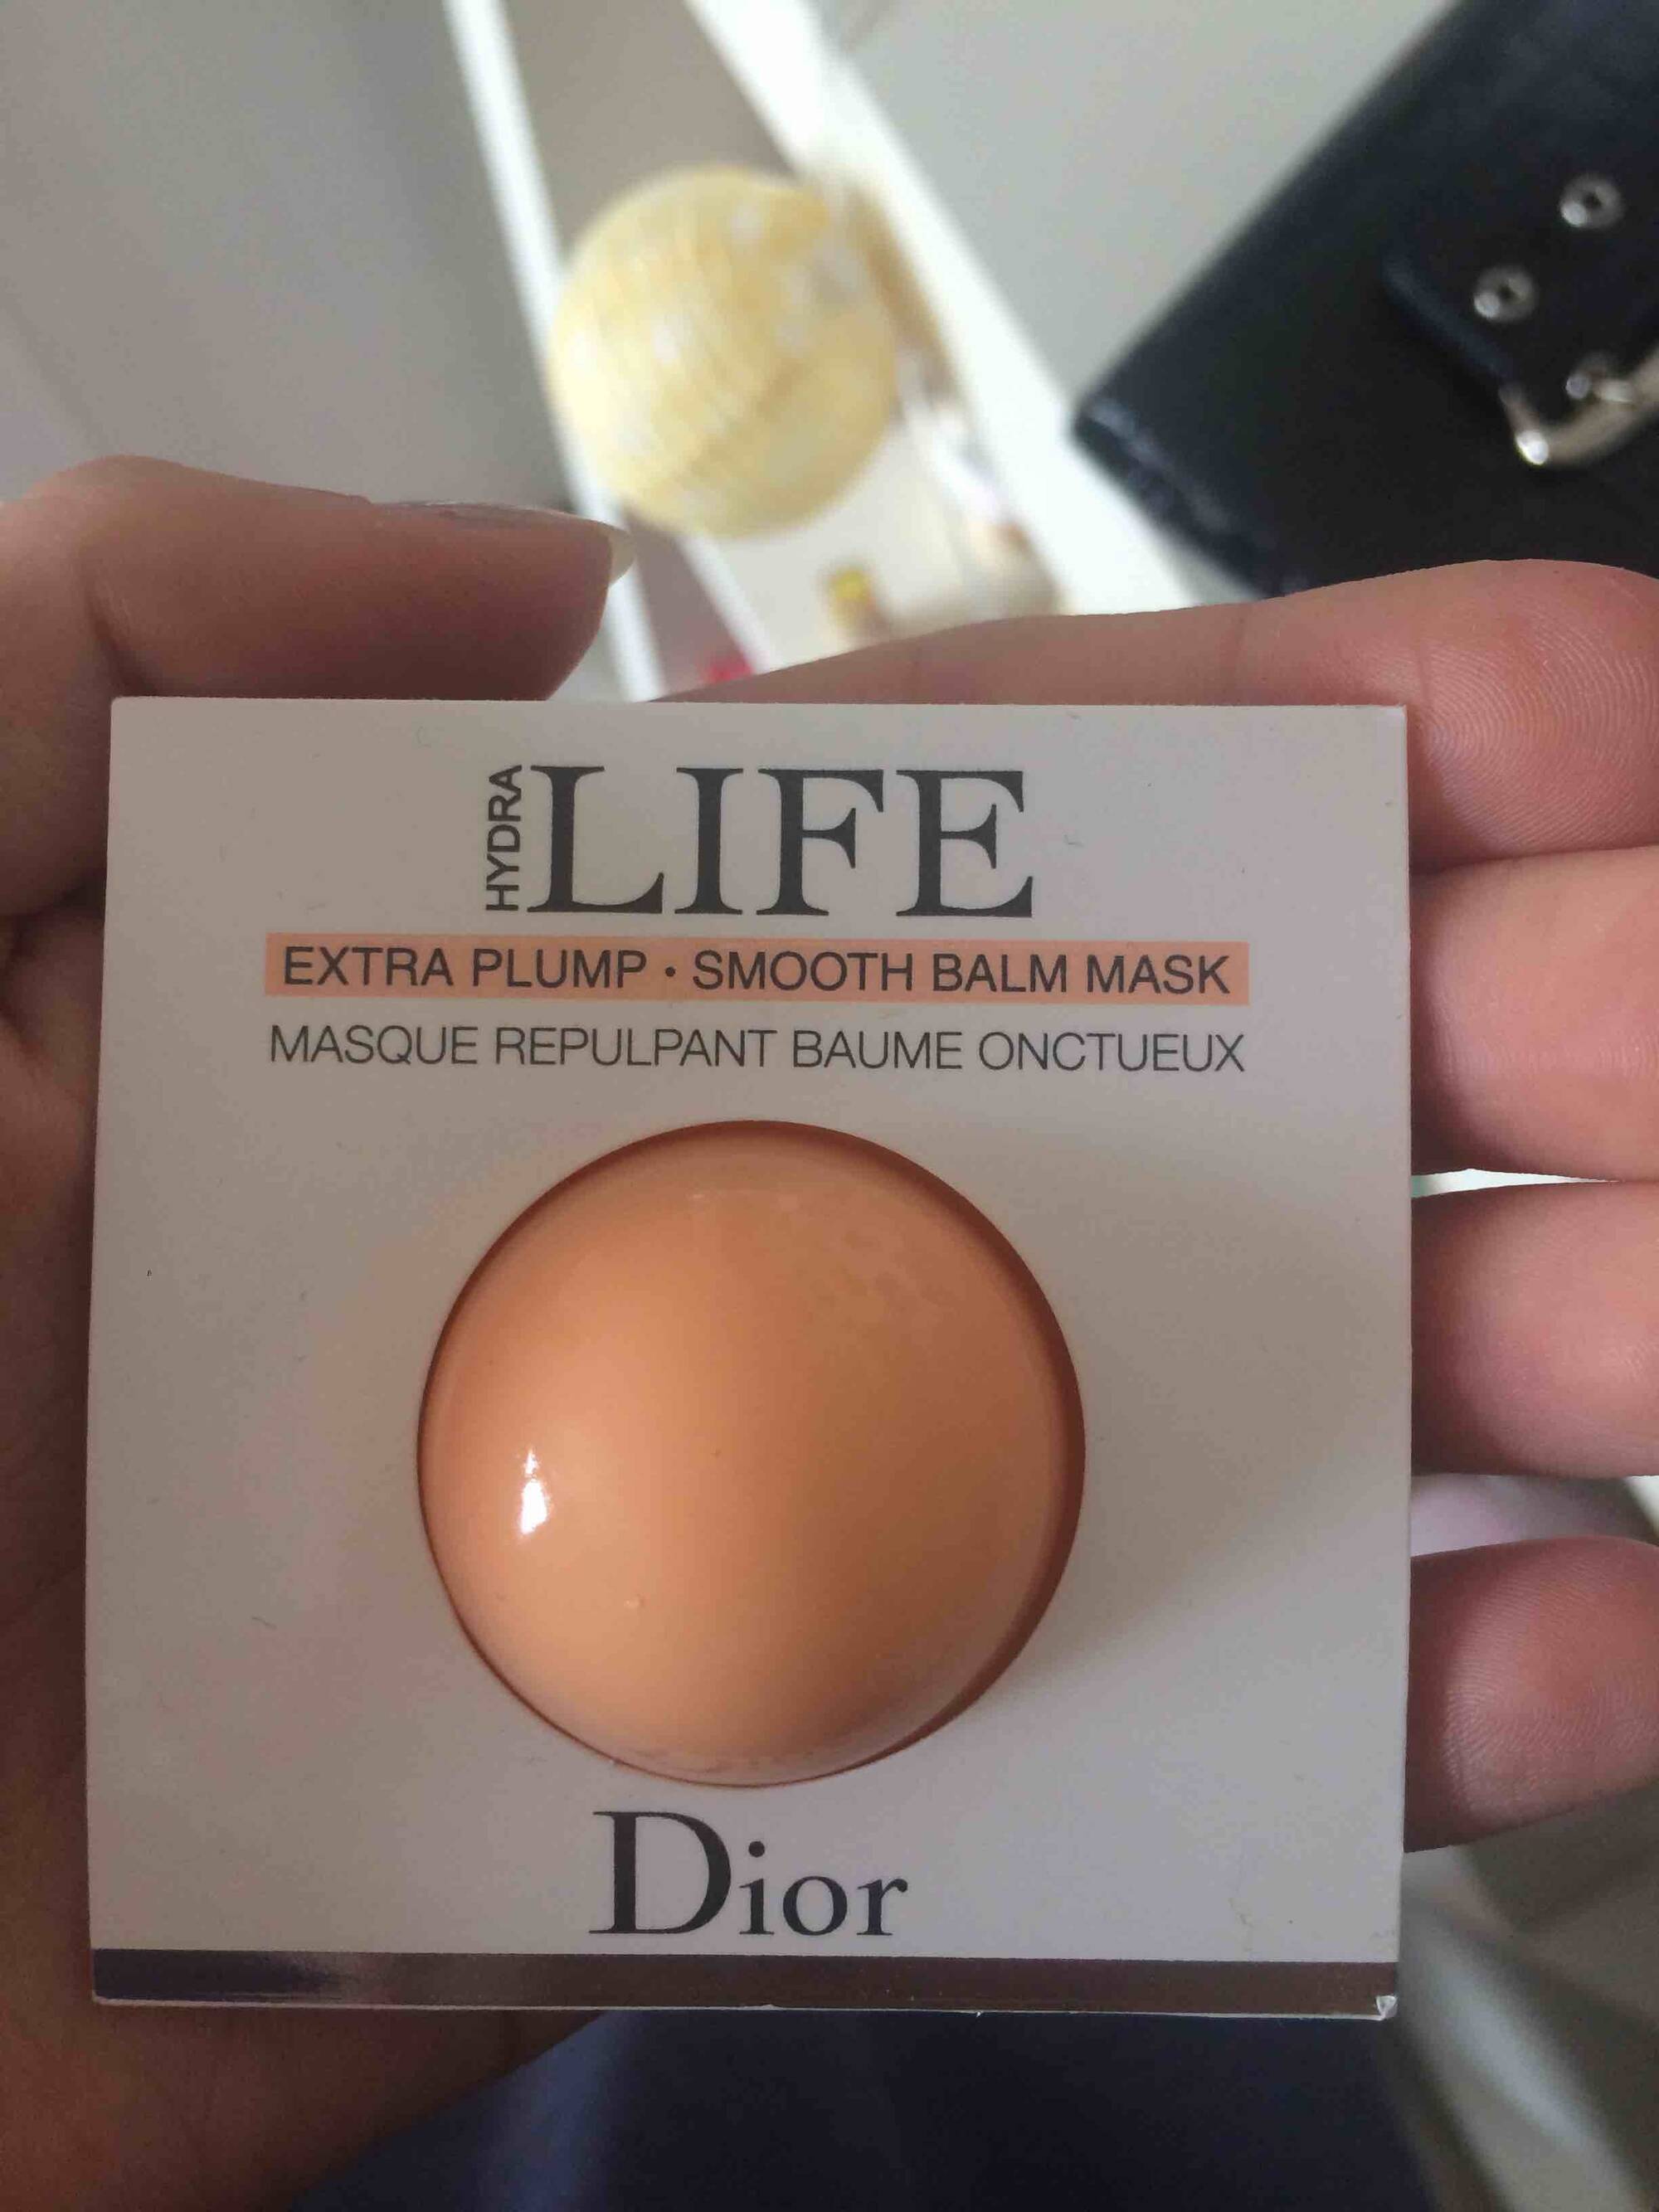 DIOR - Hydra Life - Masque repulpant baume onctueux